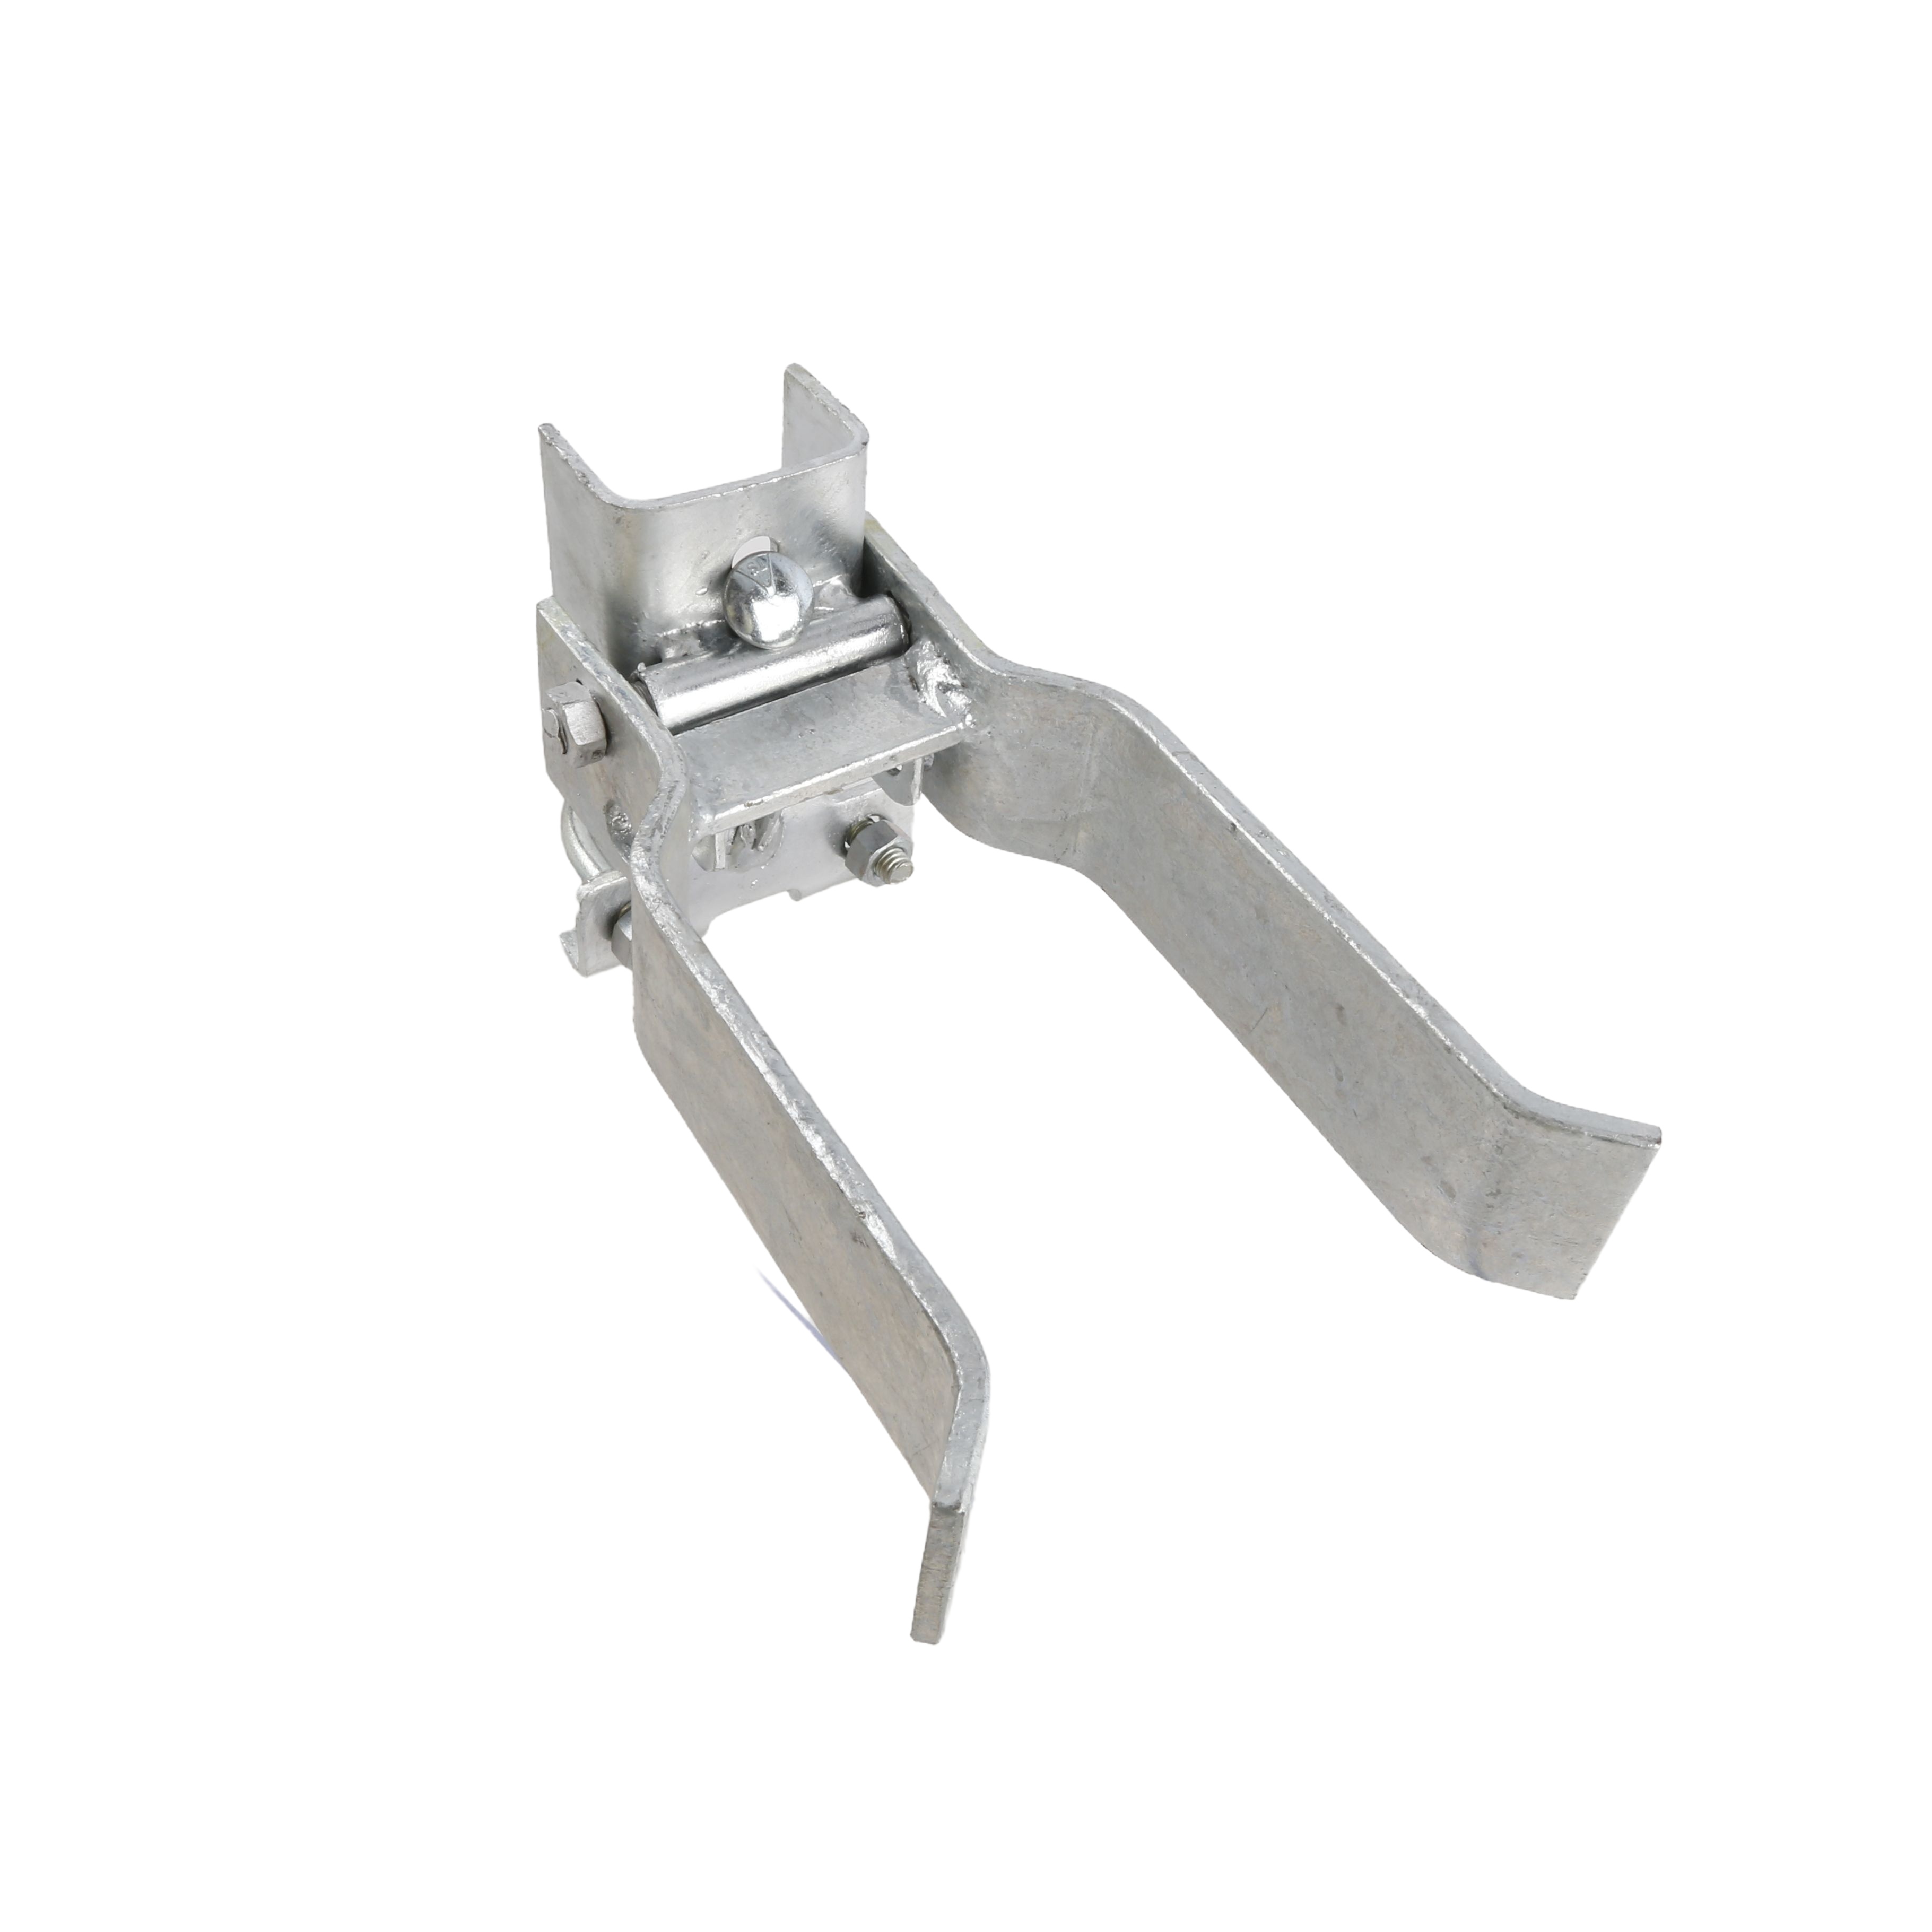 4 Strong Arm Gate Latch for Walk Gates